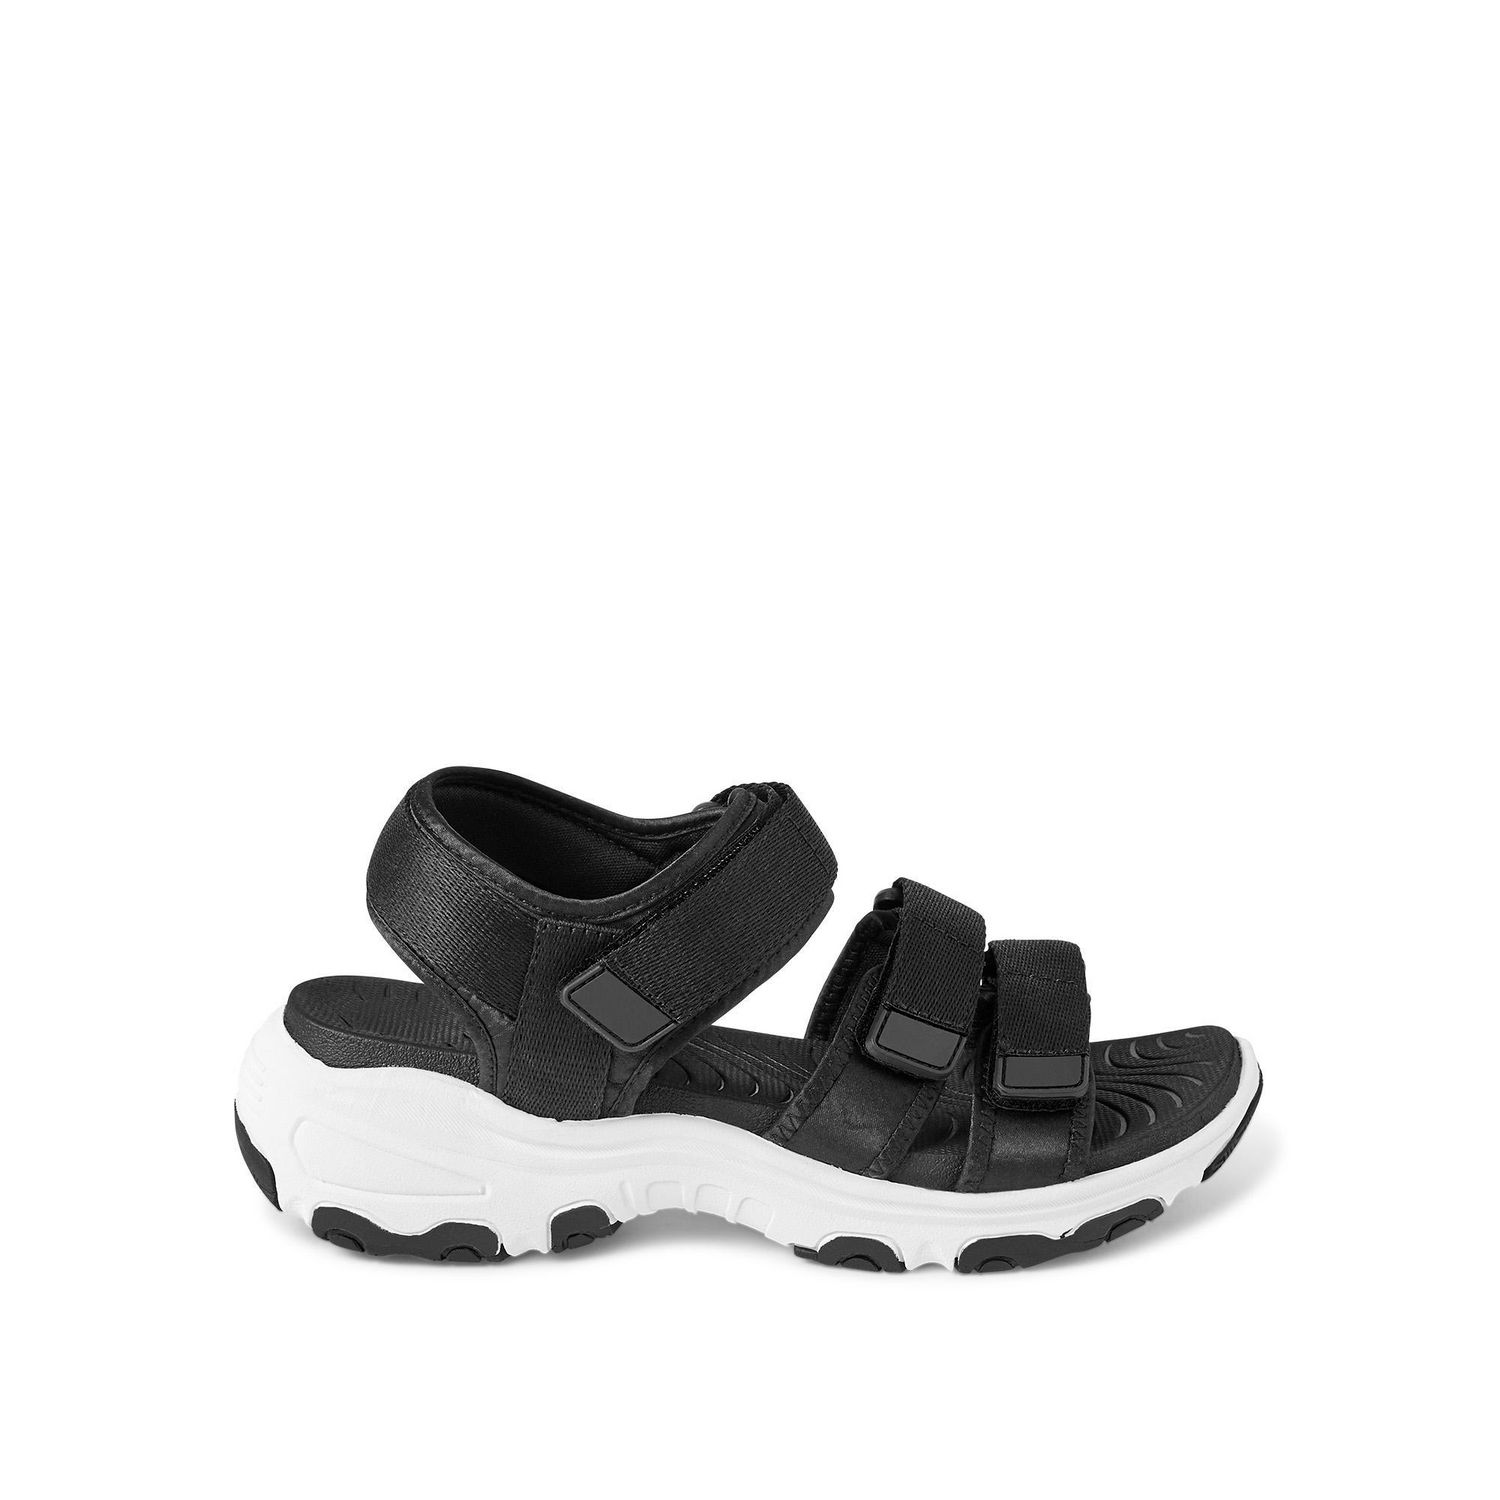 Athletic Works Women's Keith Sandals | Walmart Canada